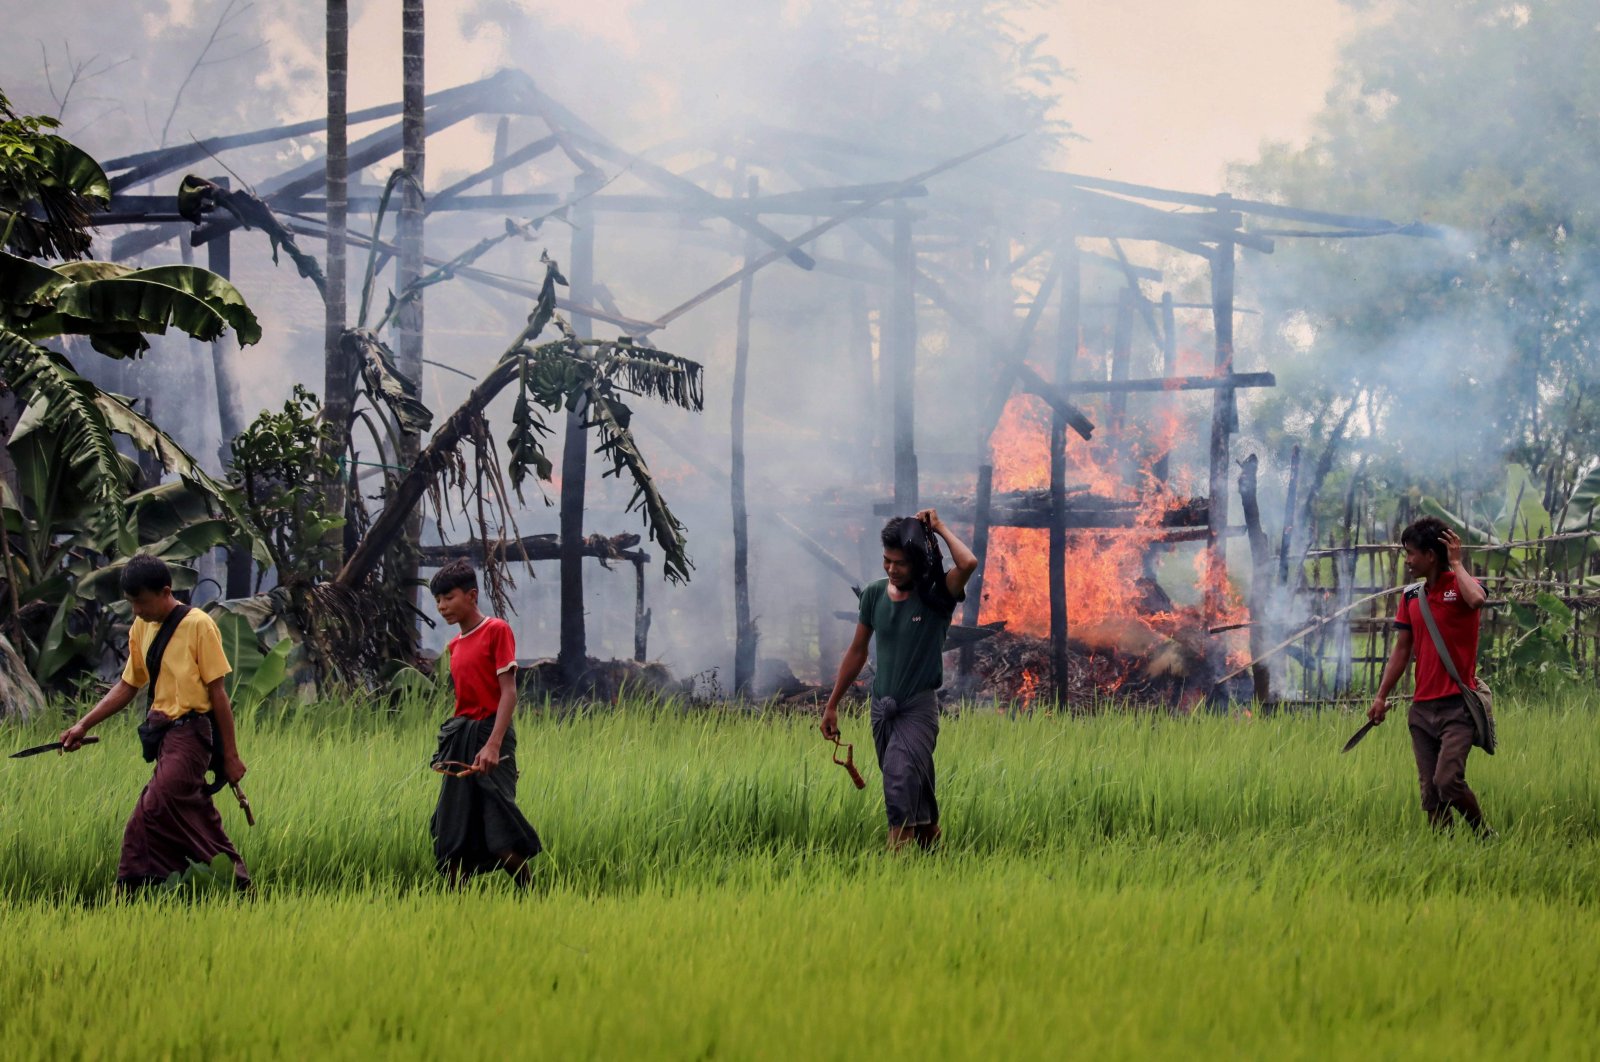 Unidentified men carry knives and slingshots as they walk past a burning house in Gawdu Tharya village near Maungdaw in Rakhine state in northern Myanmar, Sep. 7, 2017. (AFP Photo)